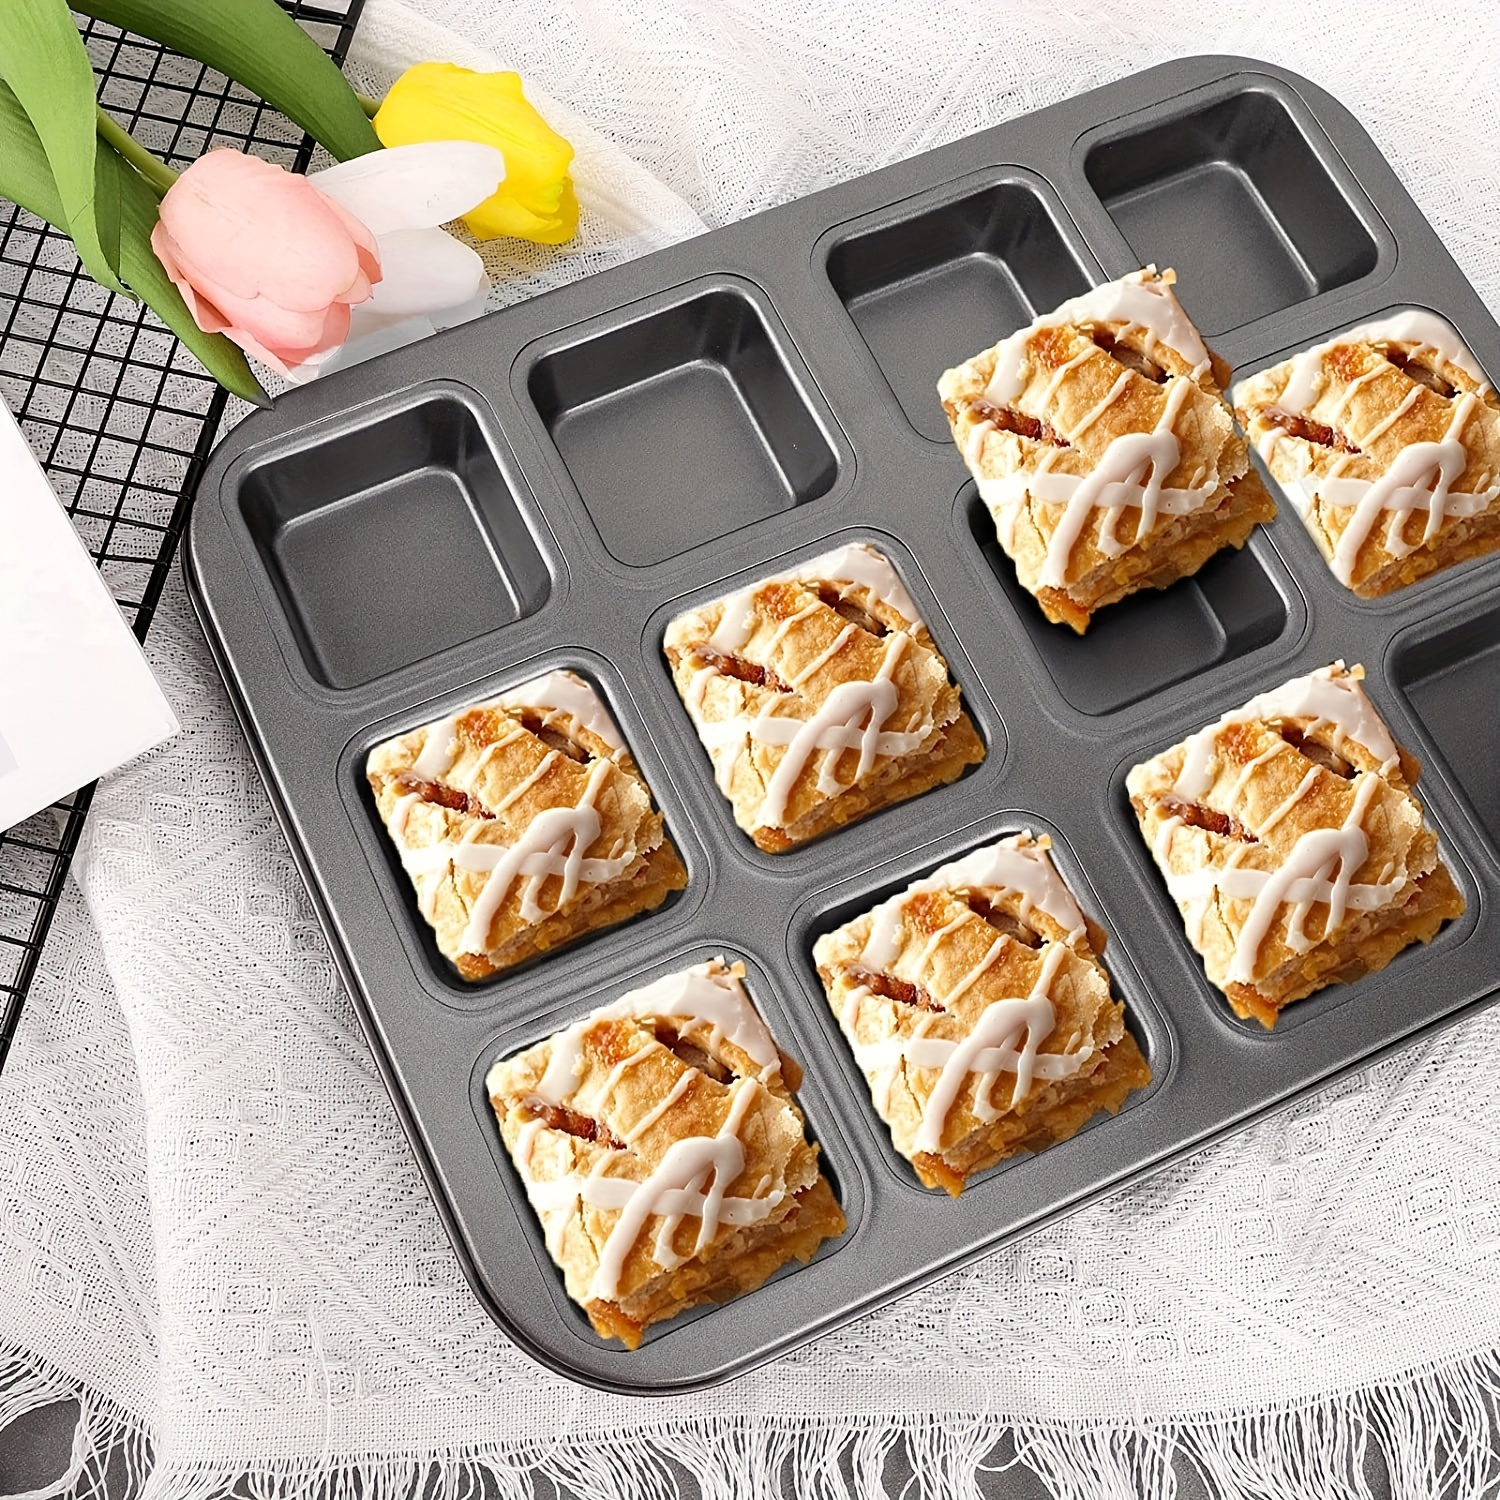  Beasea Mini Loaf Pan 8 Cavity, Nonstick Bakeware Square Bread  Pan, Carbon Steel Mini Loaf Bread Pan Cake Pans for Baking Oven: Home &  Kitchen